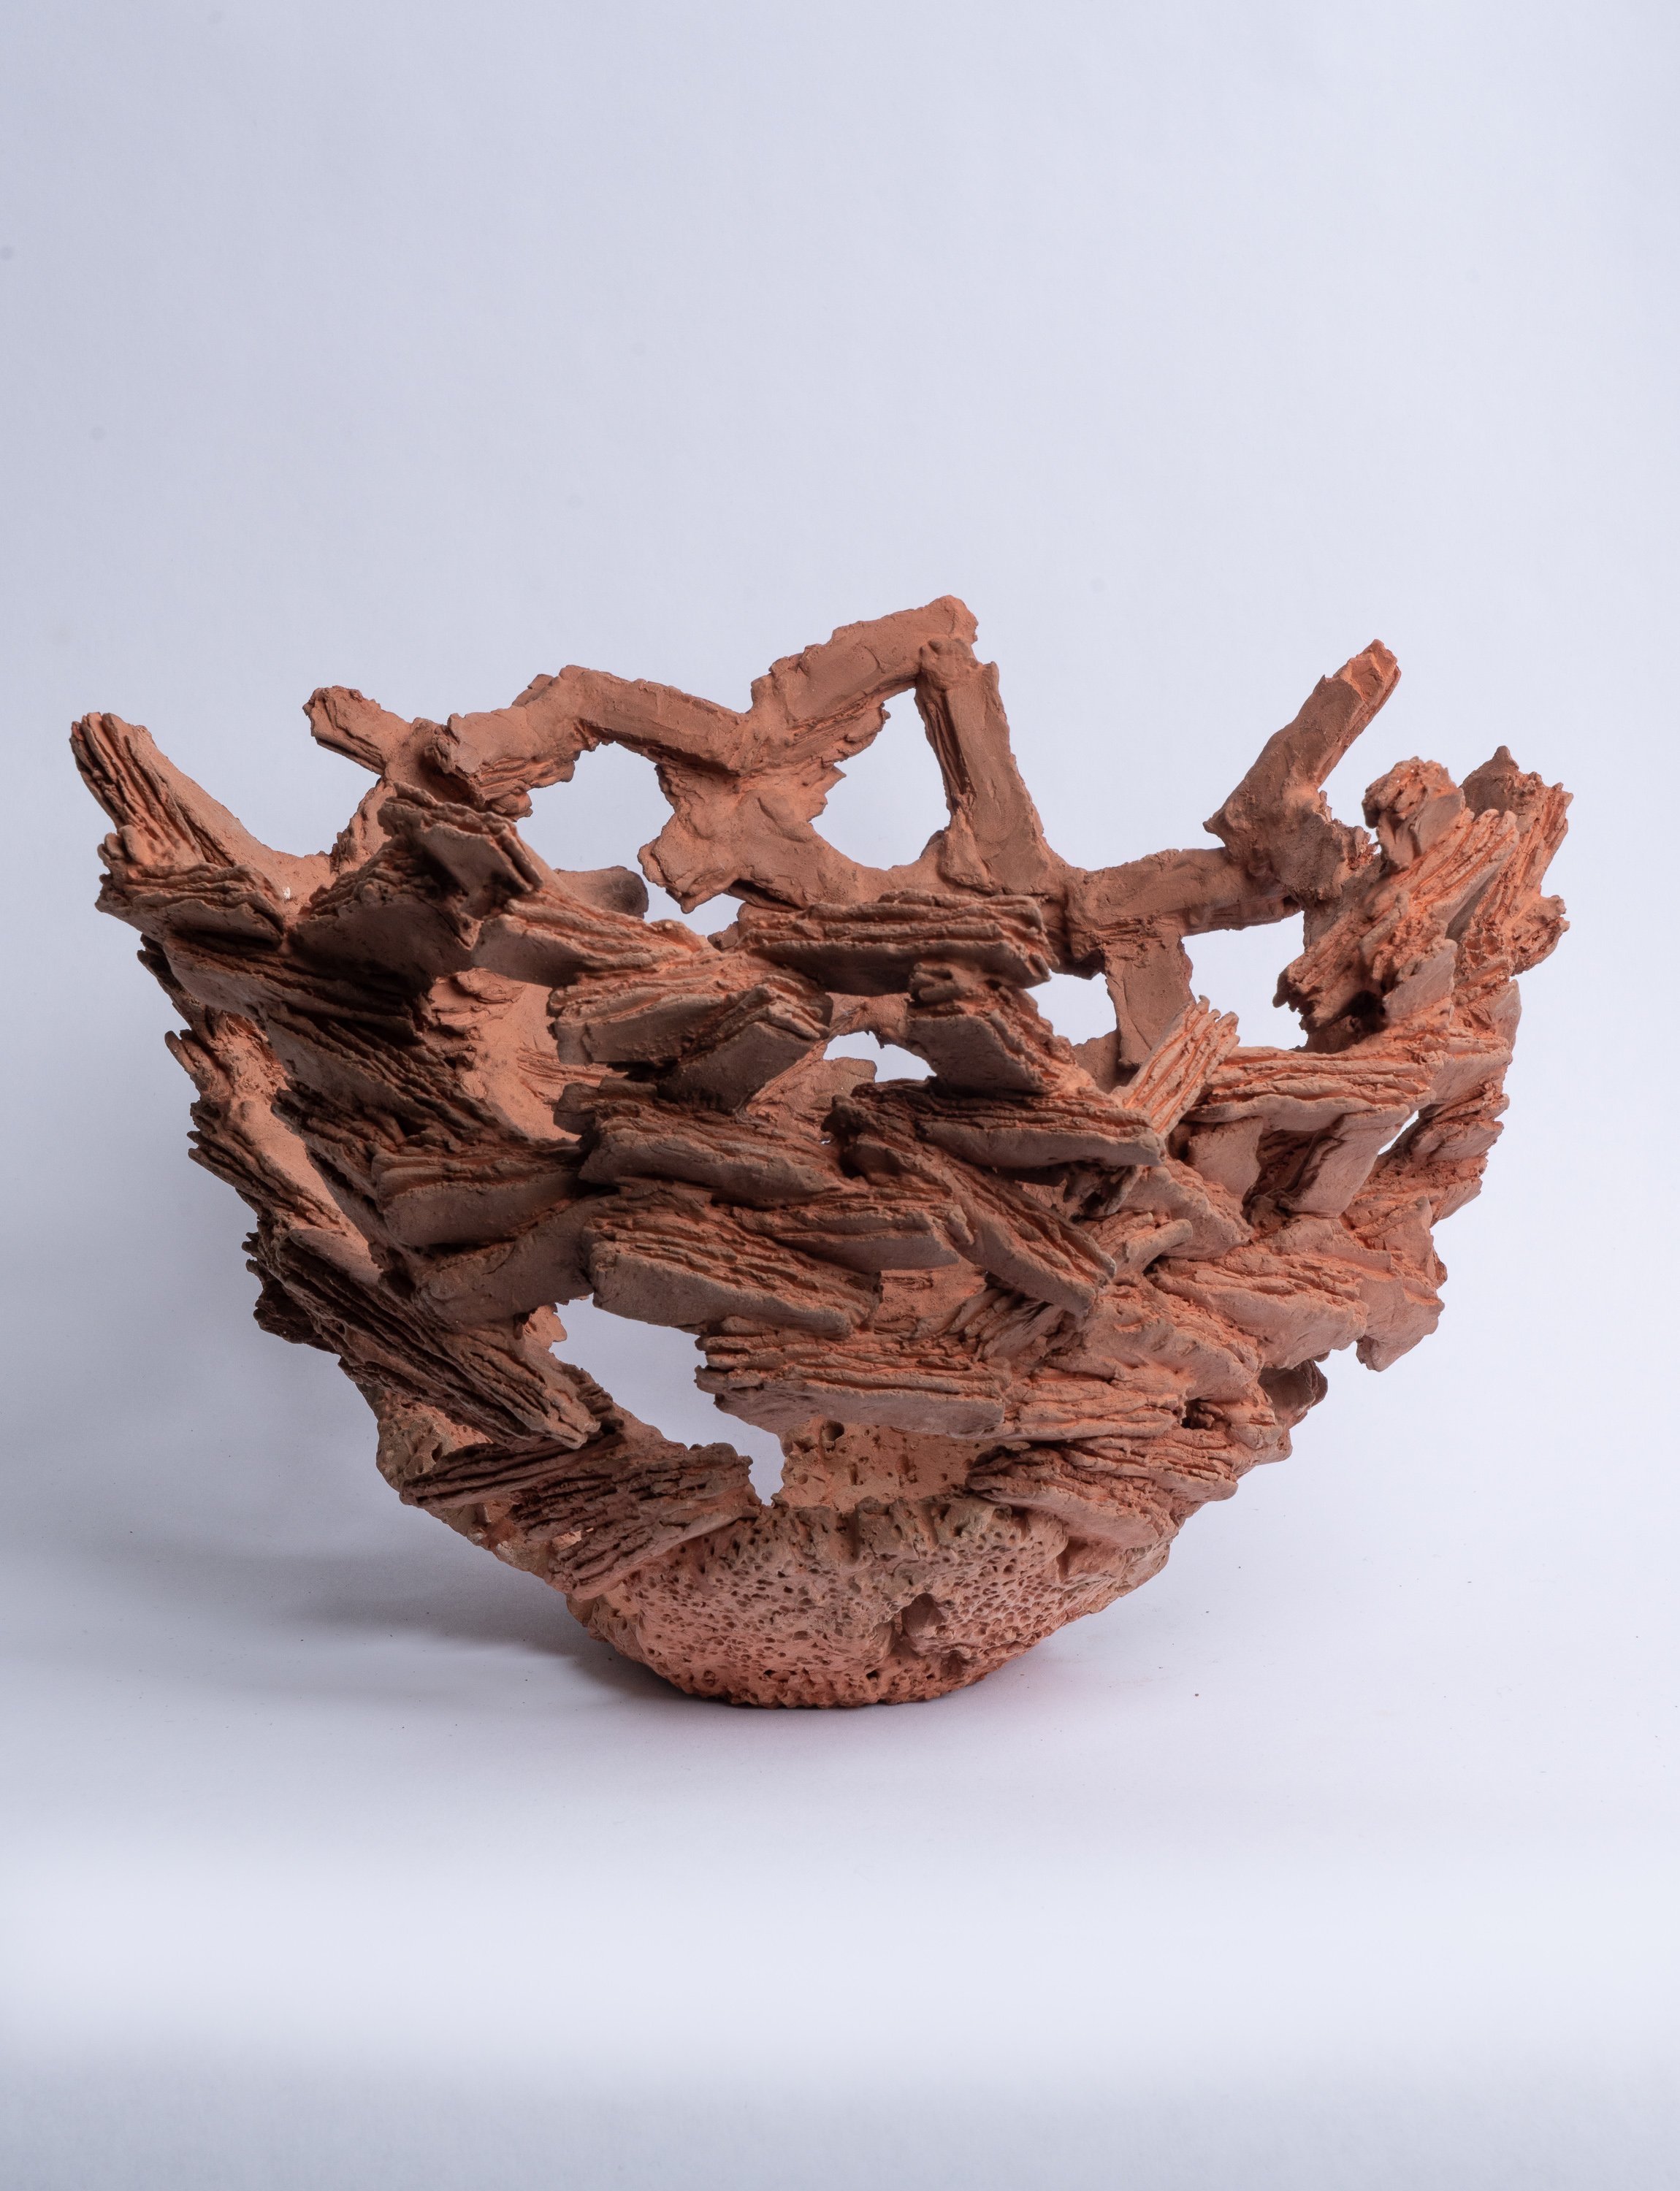   Fragmentation 4 / Begging Bowl   2018, clay, kiln- and pit-fired  8“  h.  x  12“ diam. 